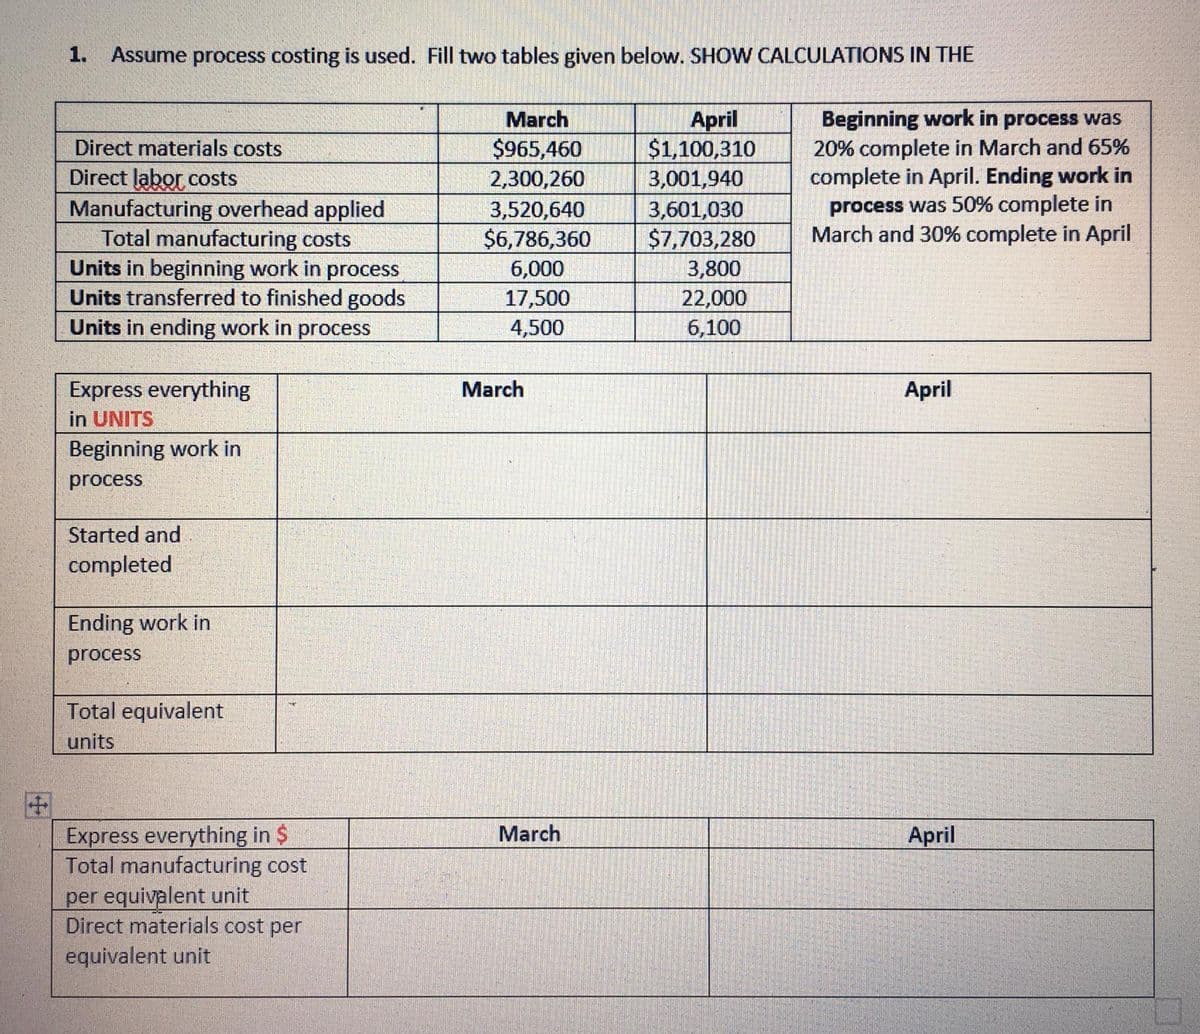 1. Assume process costing is used. Fill two tables given below. SHOW CALCULATIONS IN THE
Beginning work in process was
20% complete in March and 65%
complete in April. Ending work in
process was 50% complete in
March and 30% complete in April
March
April
$1,100,310
3,001,940
Direct materials costs
$965,460
Direct labor costs
Manufacturing overhead applied
Total manufacturing costs
Units in beginning work in process
Units transferred to finished goods
Units in ending work in process
2,300,260
3,520,640
$6,786,360
6,000
17,500
4,500
3,601,030
$7,703,280
3,800
22,000
6,100
Express everything
in UNITS
March
April
Beginning work in
process
Started and
completed
Ending work in
process
Total equivalent
units
Express everything in $
Total manufacturing cost
March
April
per equivalent unit
Direct materials cost per
equivalent unit
